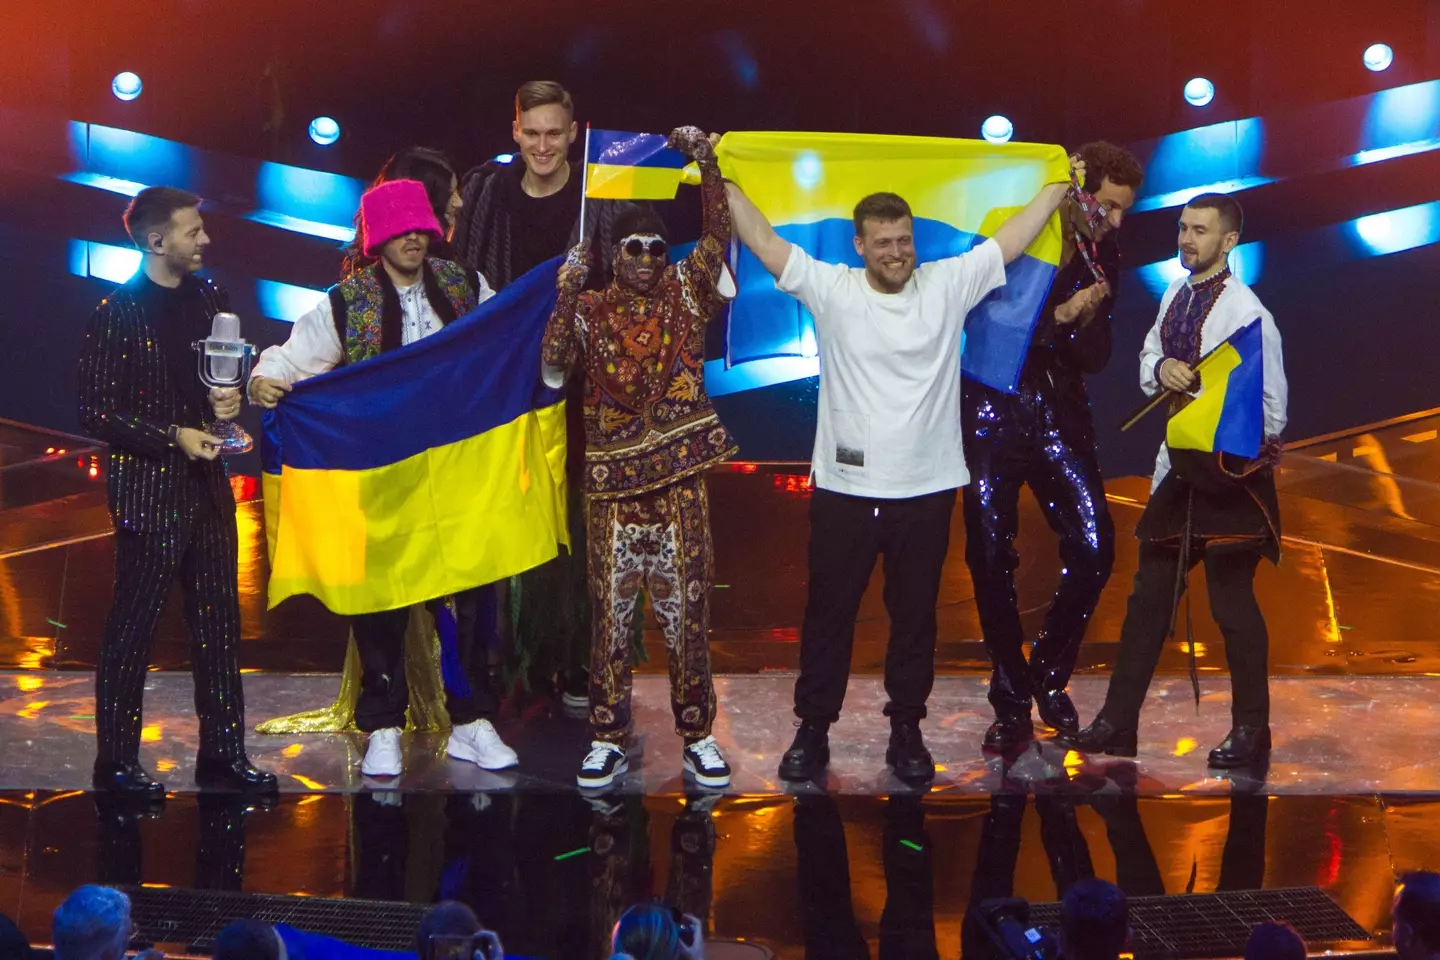 Ukrainian rap group Kalush Orchestra won Eurovision, however Russian forces have reportedly responded to the win with a chilling message.